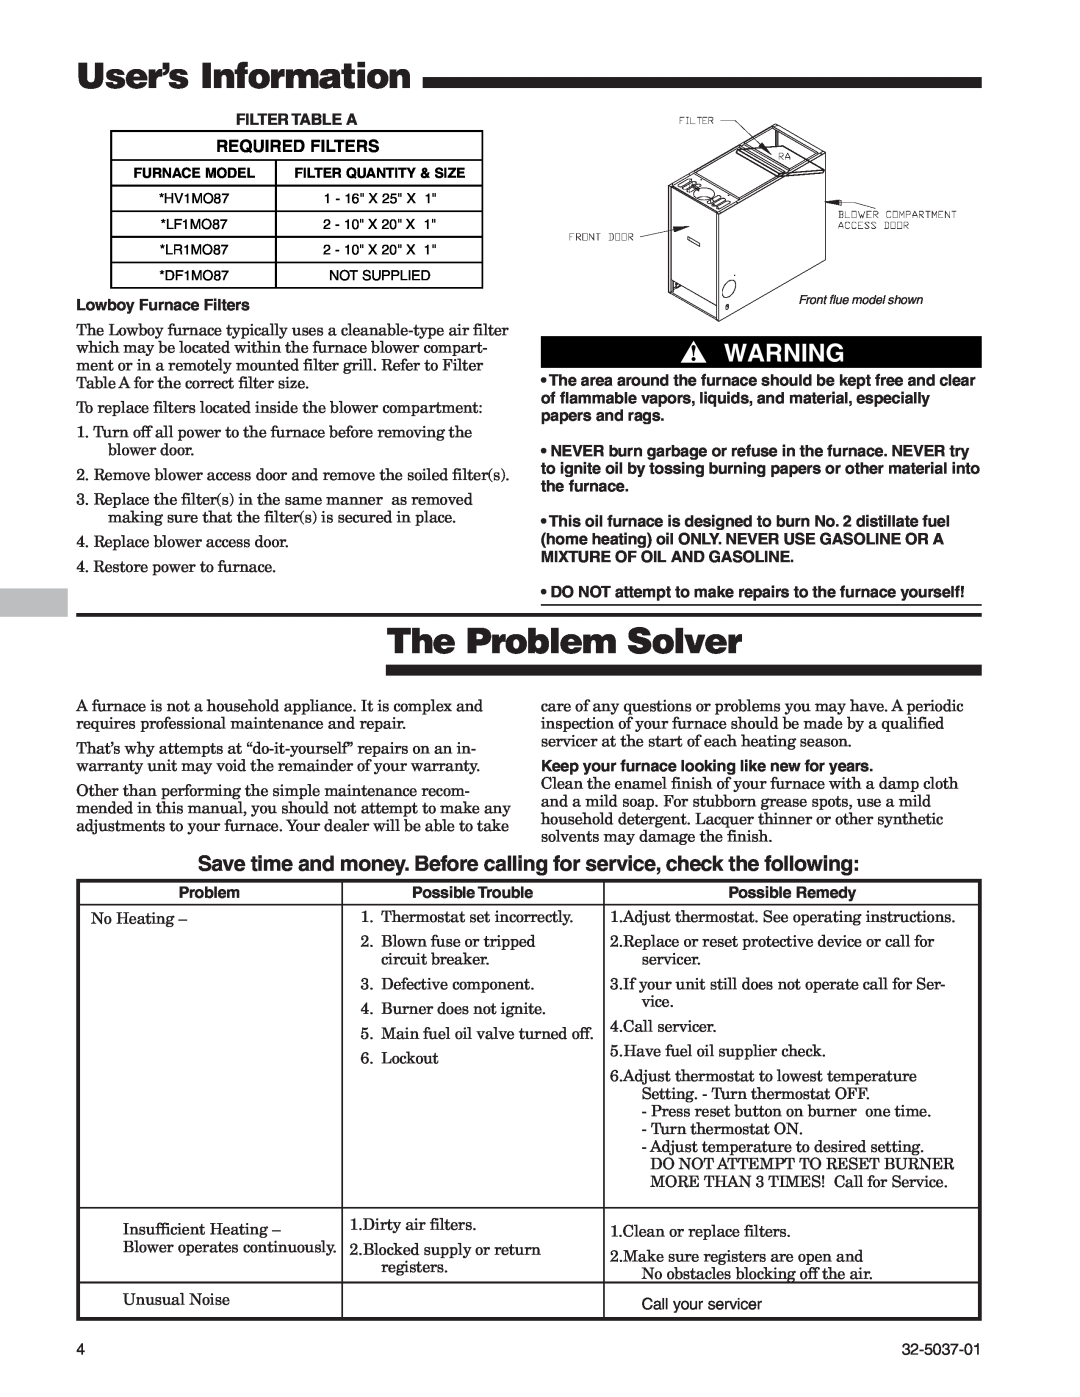 American Standard 32-5037-01 manual The Problem Solver, User’s Information, Required Filters 